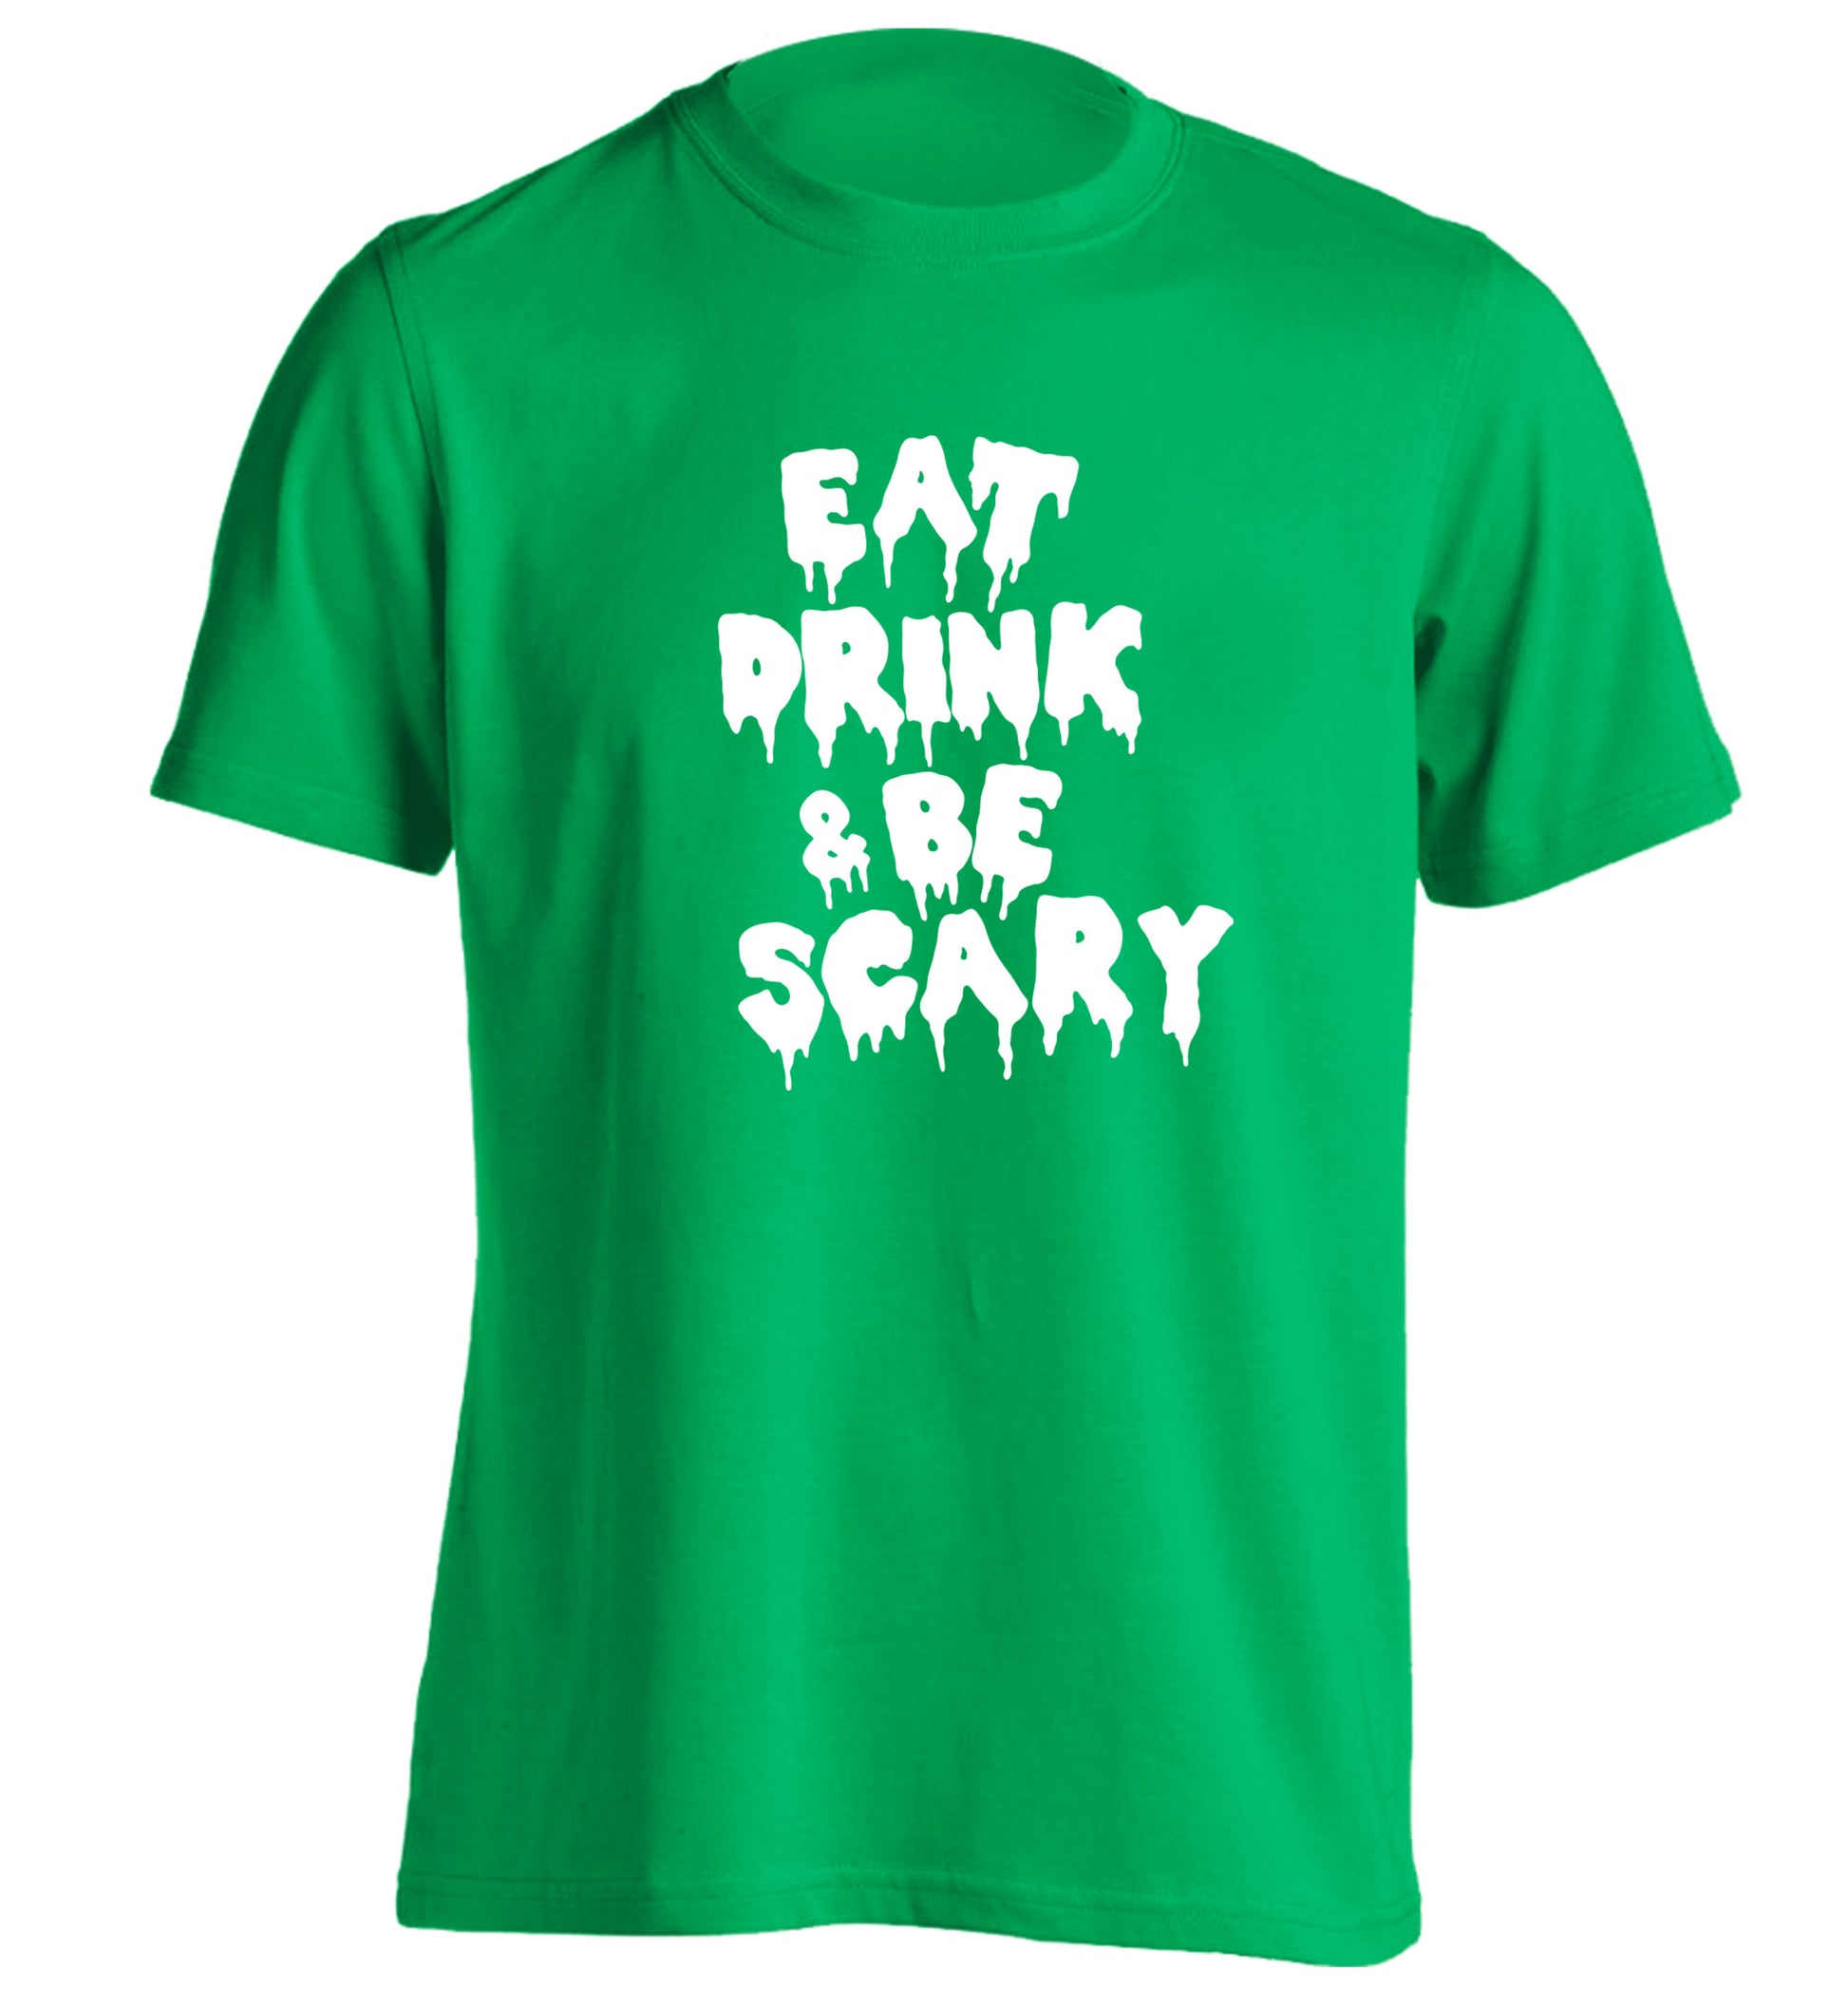 Eat drink and be scary adults unisex green Tshirt 2XL